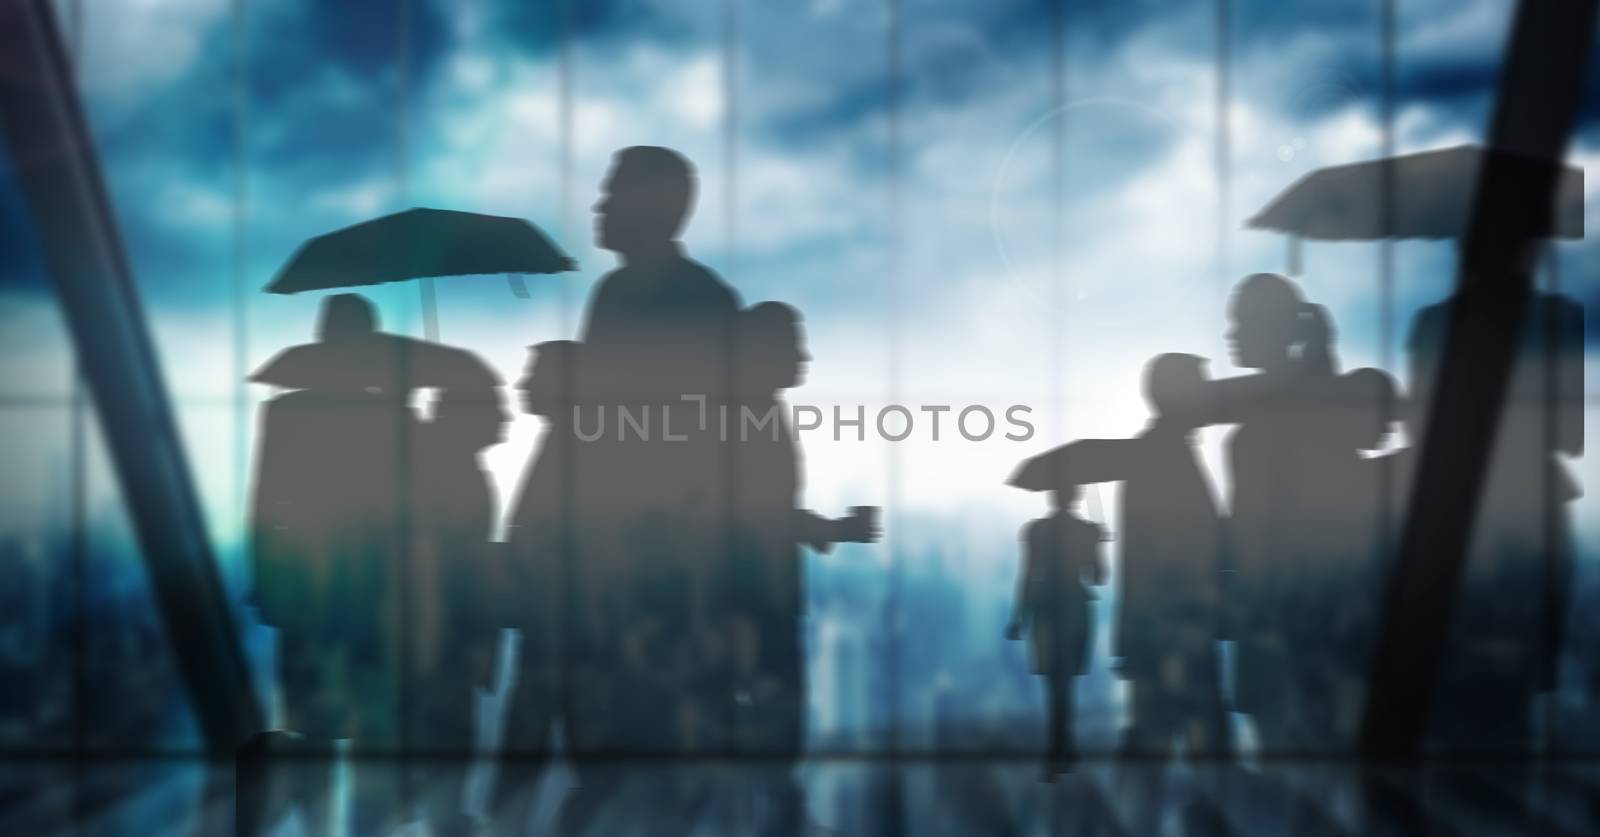 Digital composite of Silhouette of group of people with umbrellas over windows transition